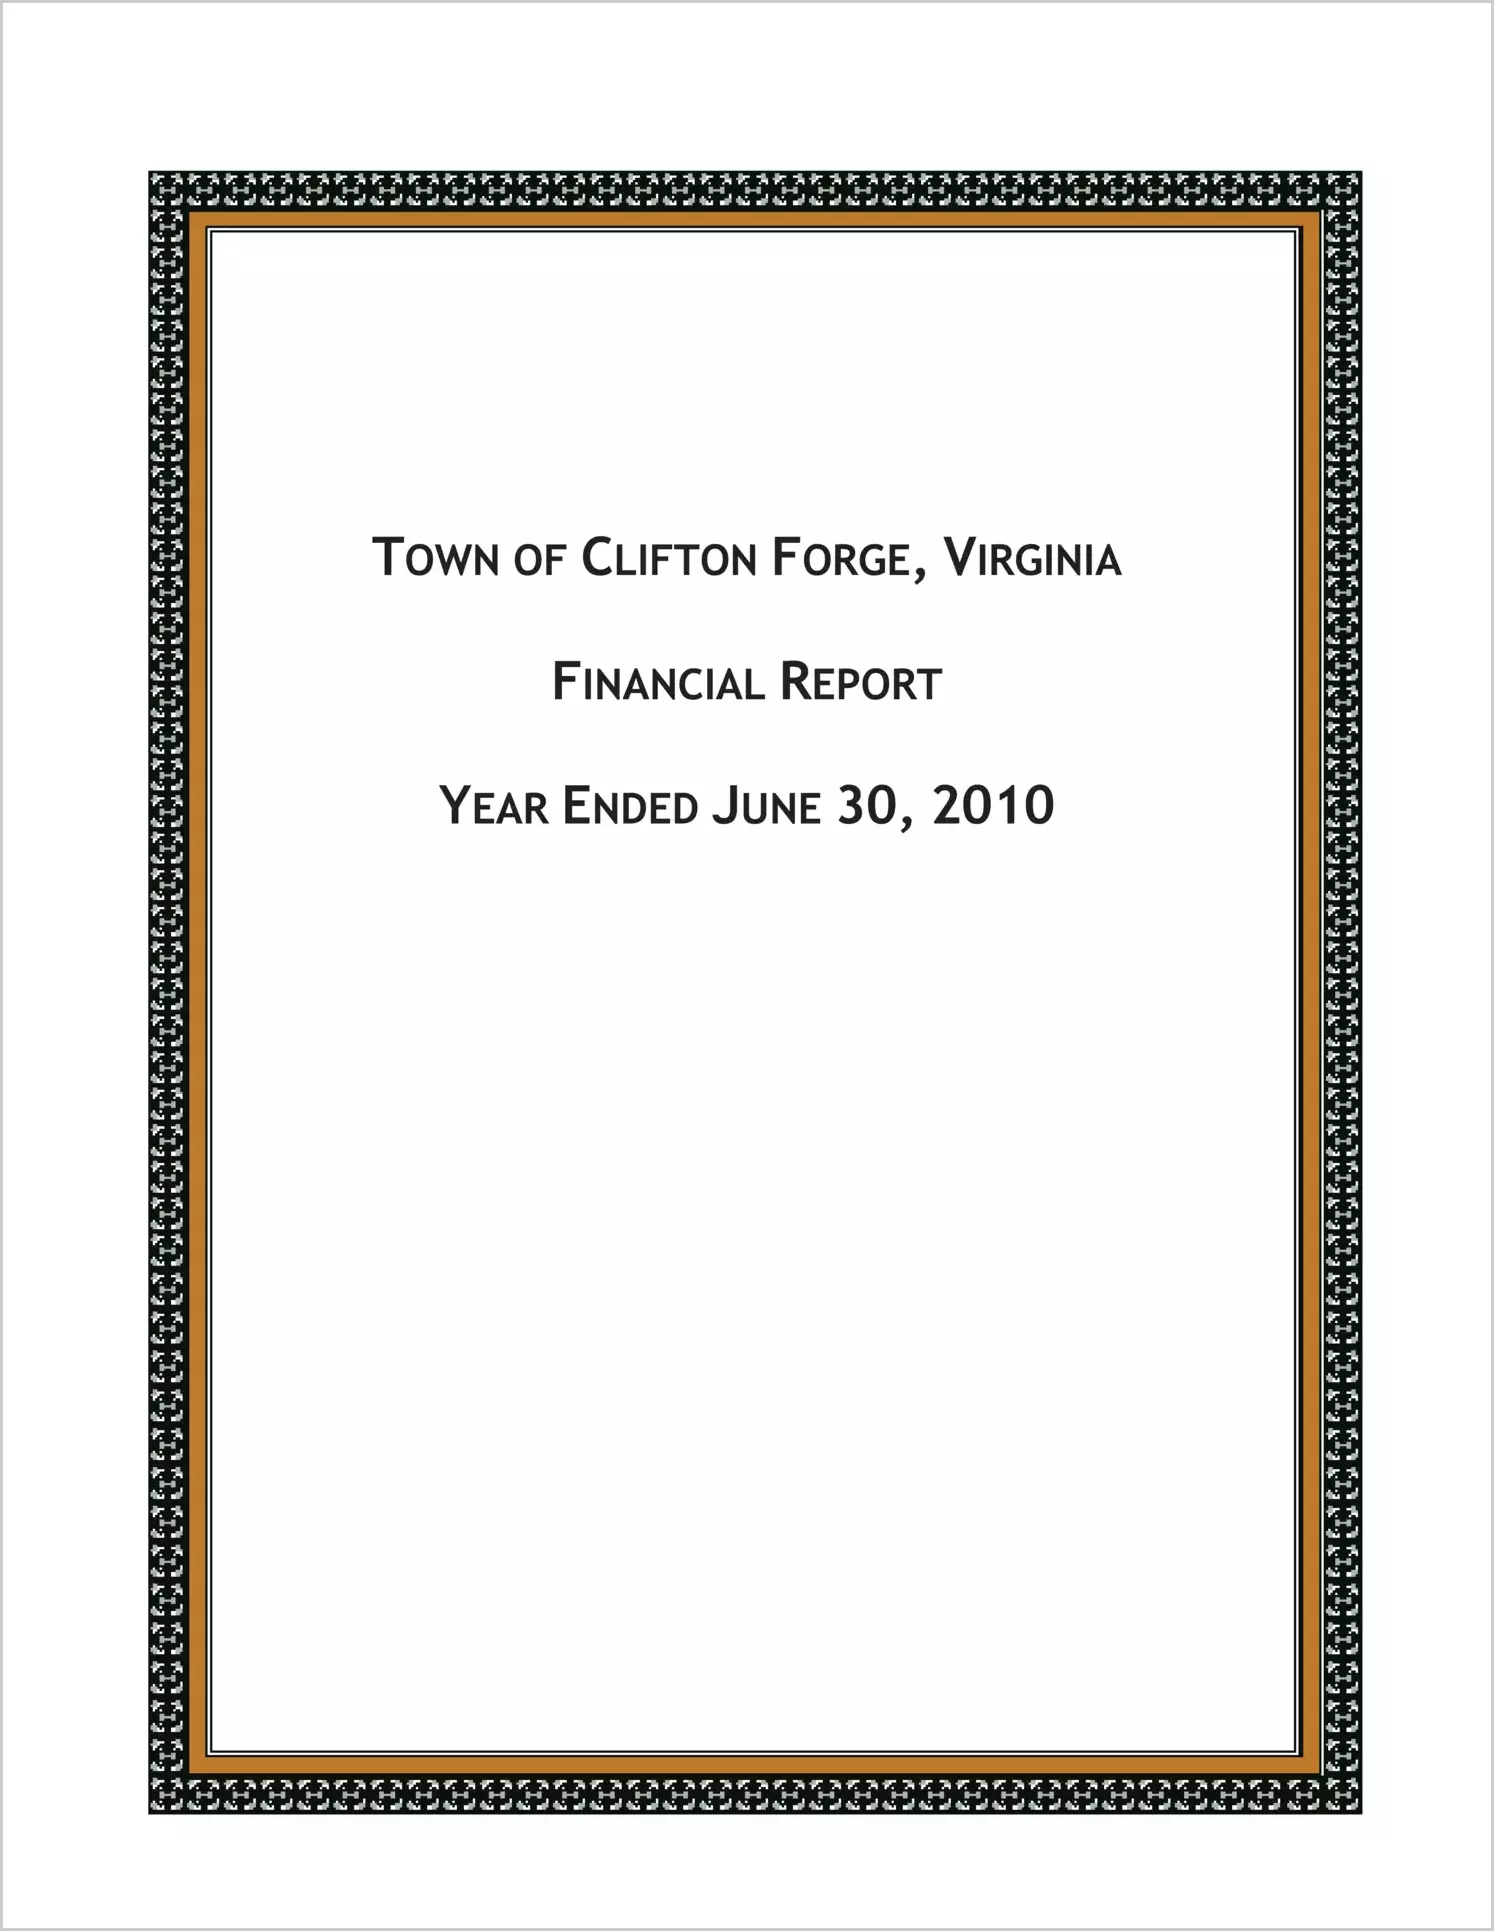 2010 Annual Financial Report for Town of Clifton Forge